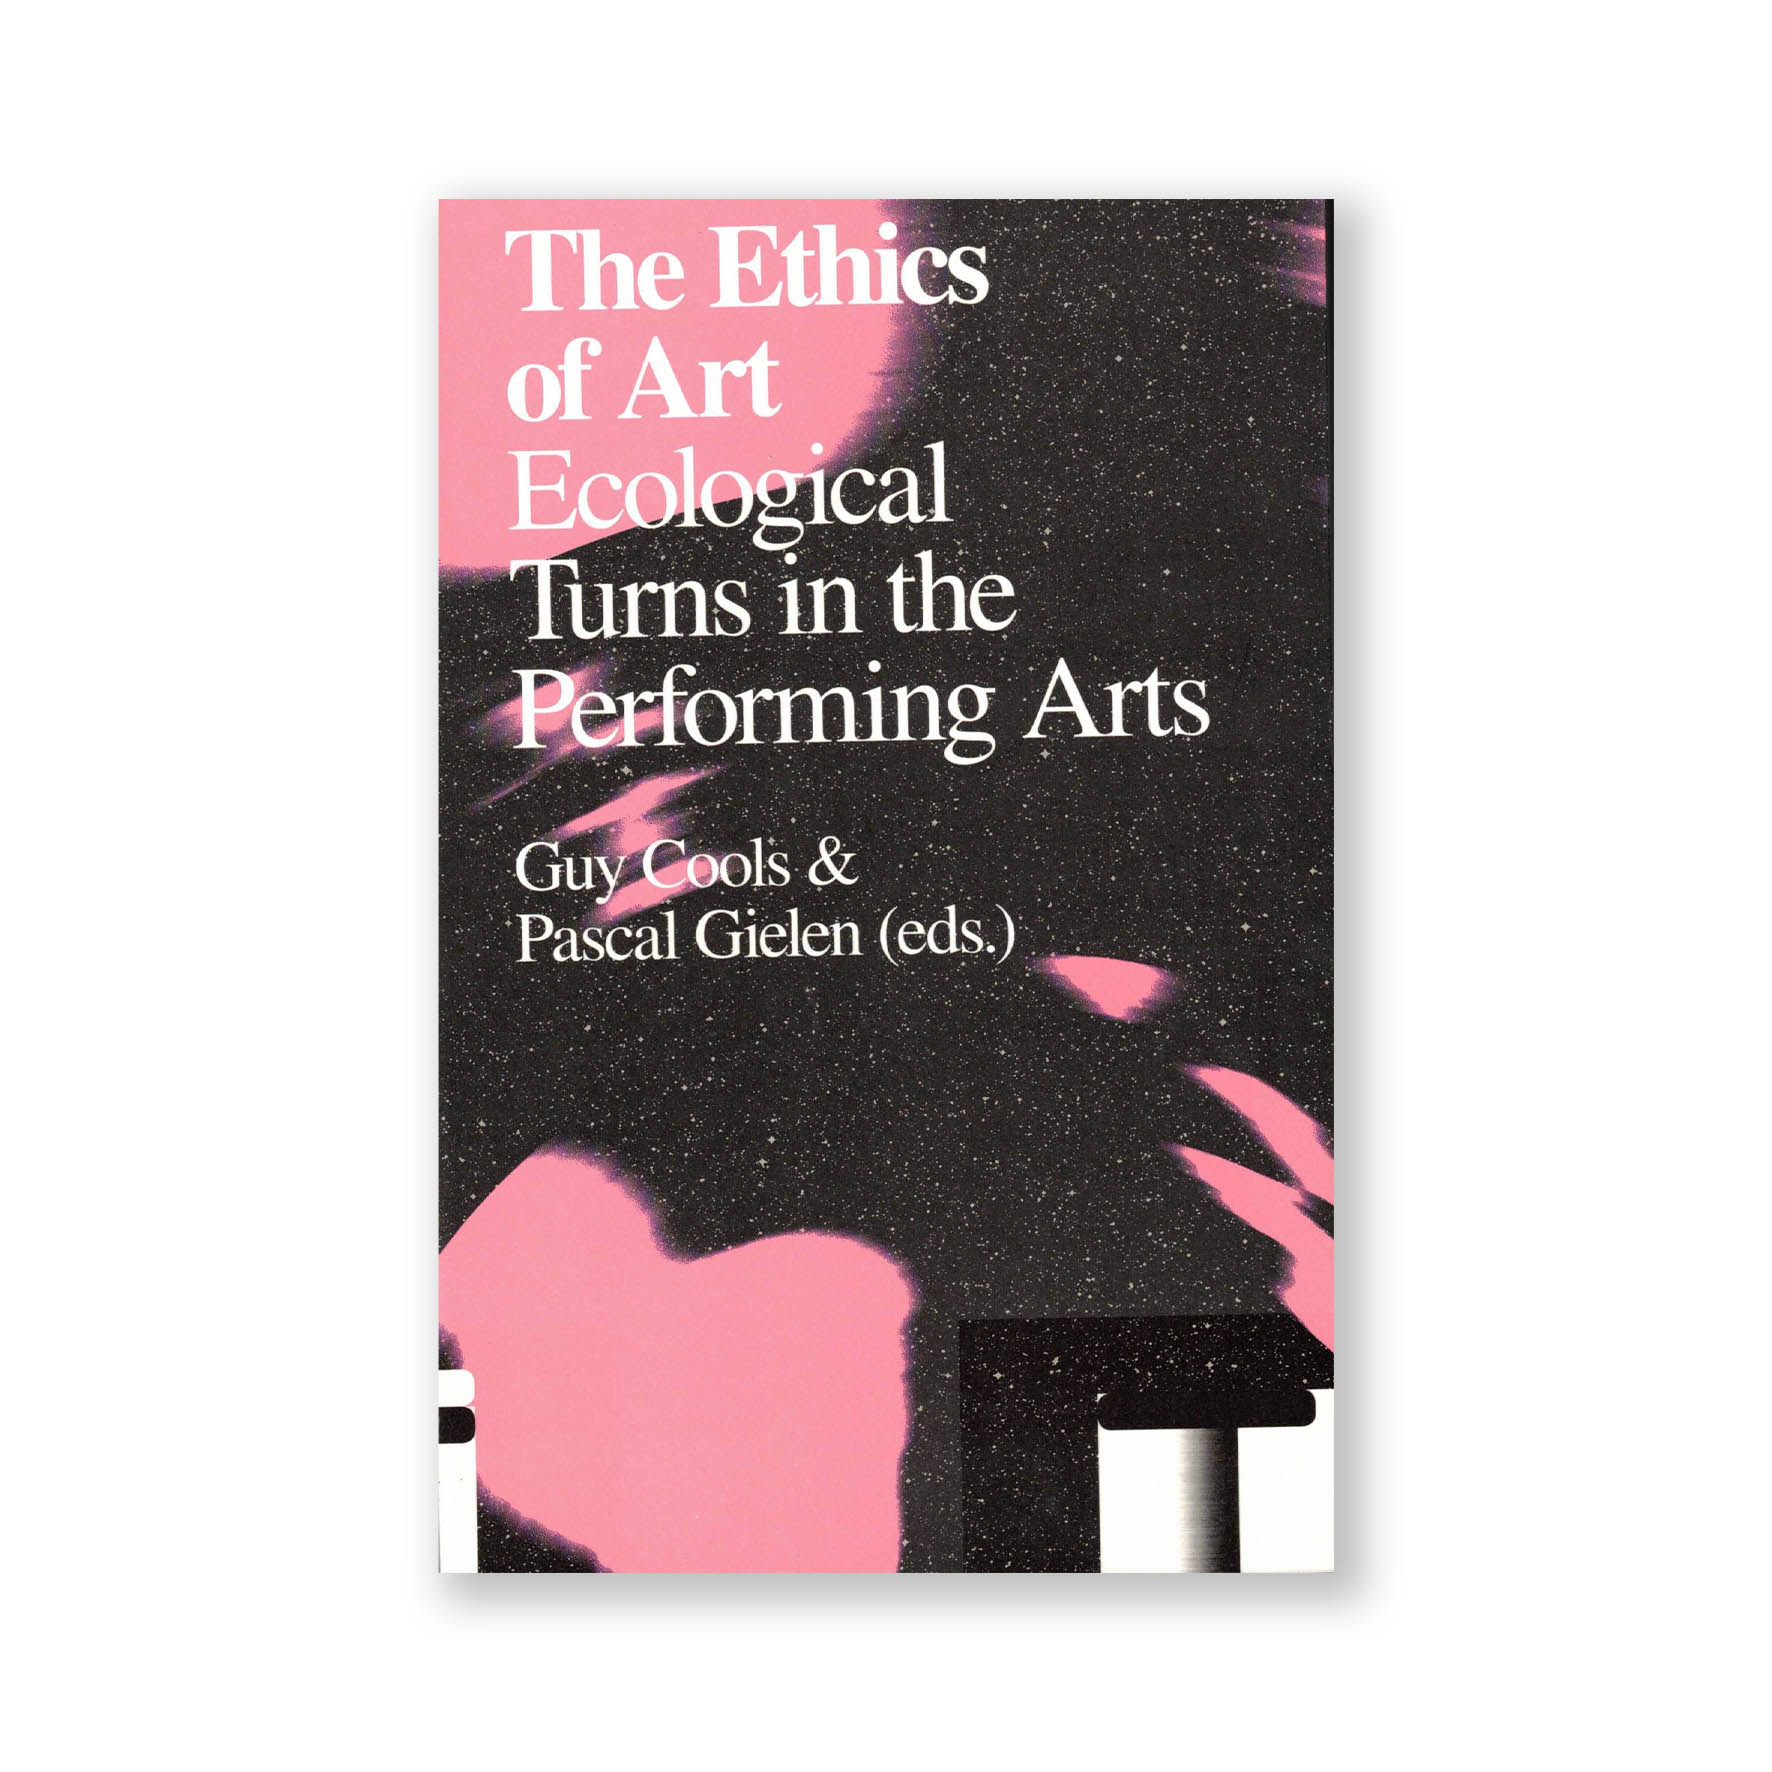 The Ethics of Art. Ecological Turns in the Performing Arts